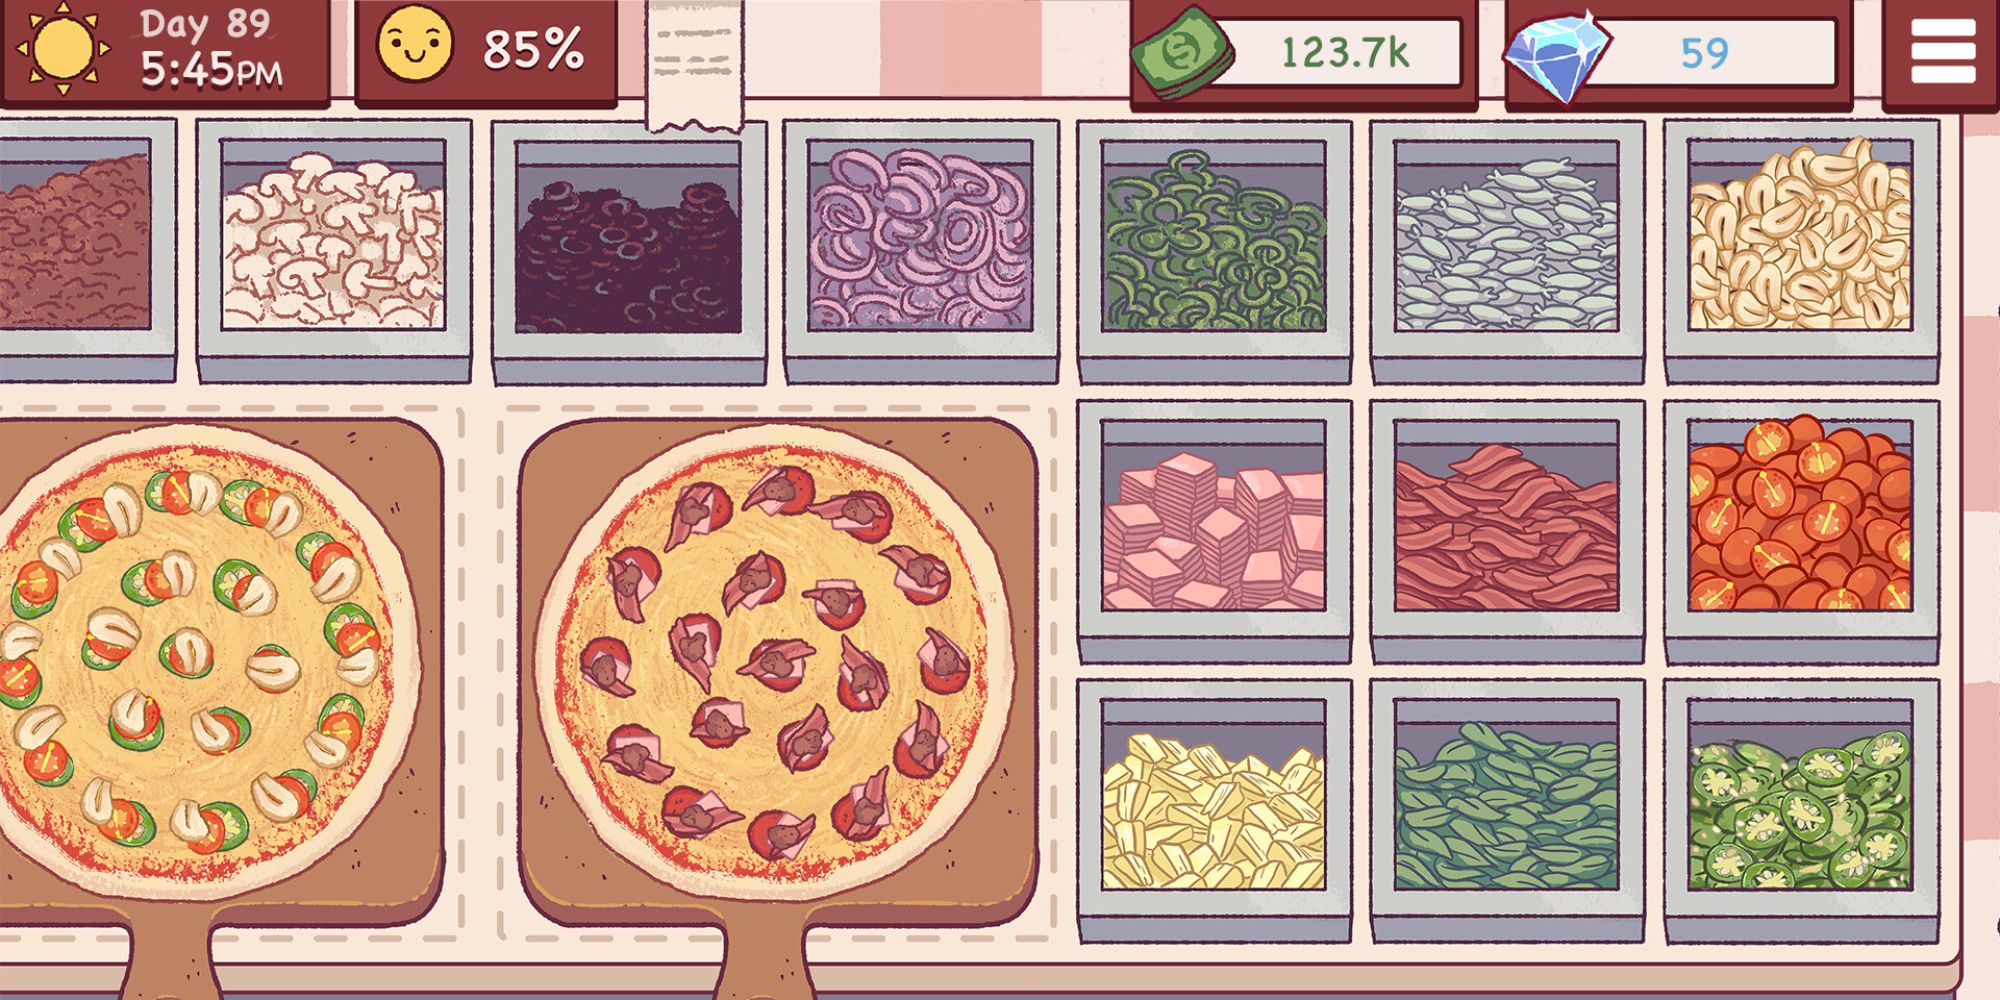 A screenshot featuring gameplay from Good Pizza, Great Pizza.